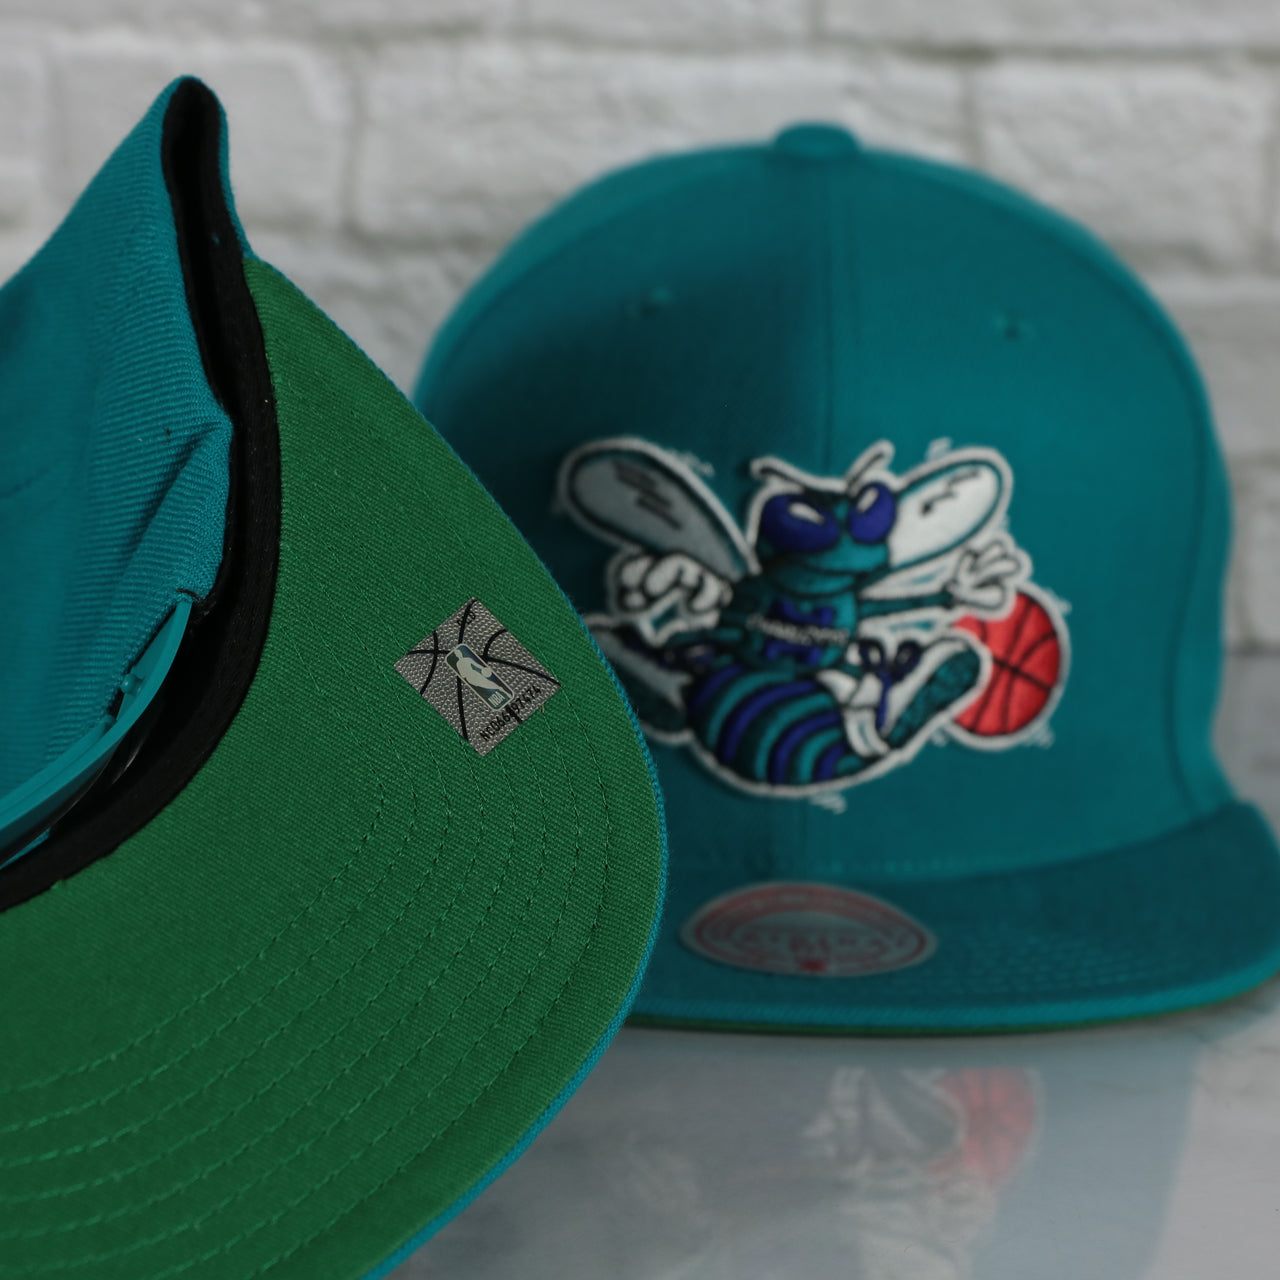 green under visor on the Charlotte Hornets Vintage Retro NBA Team Ground 2.0 Mitchell and Ness Snapback Hat | Teal